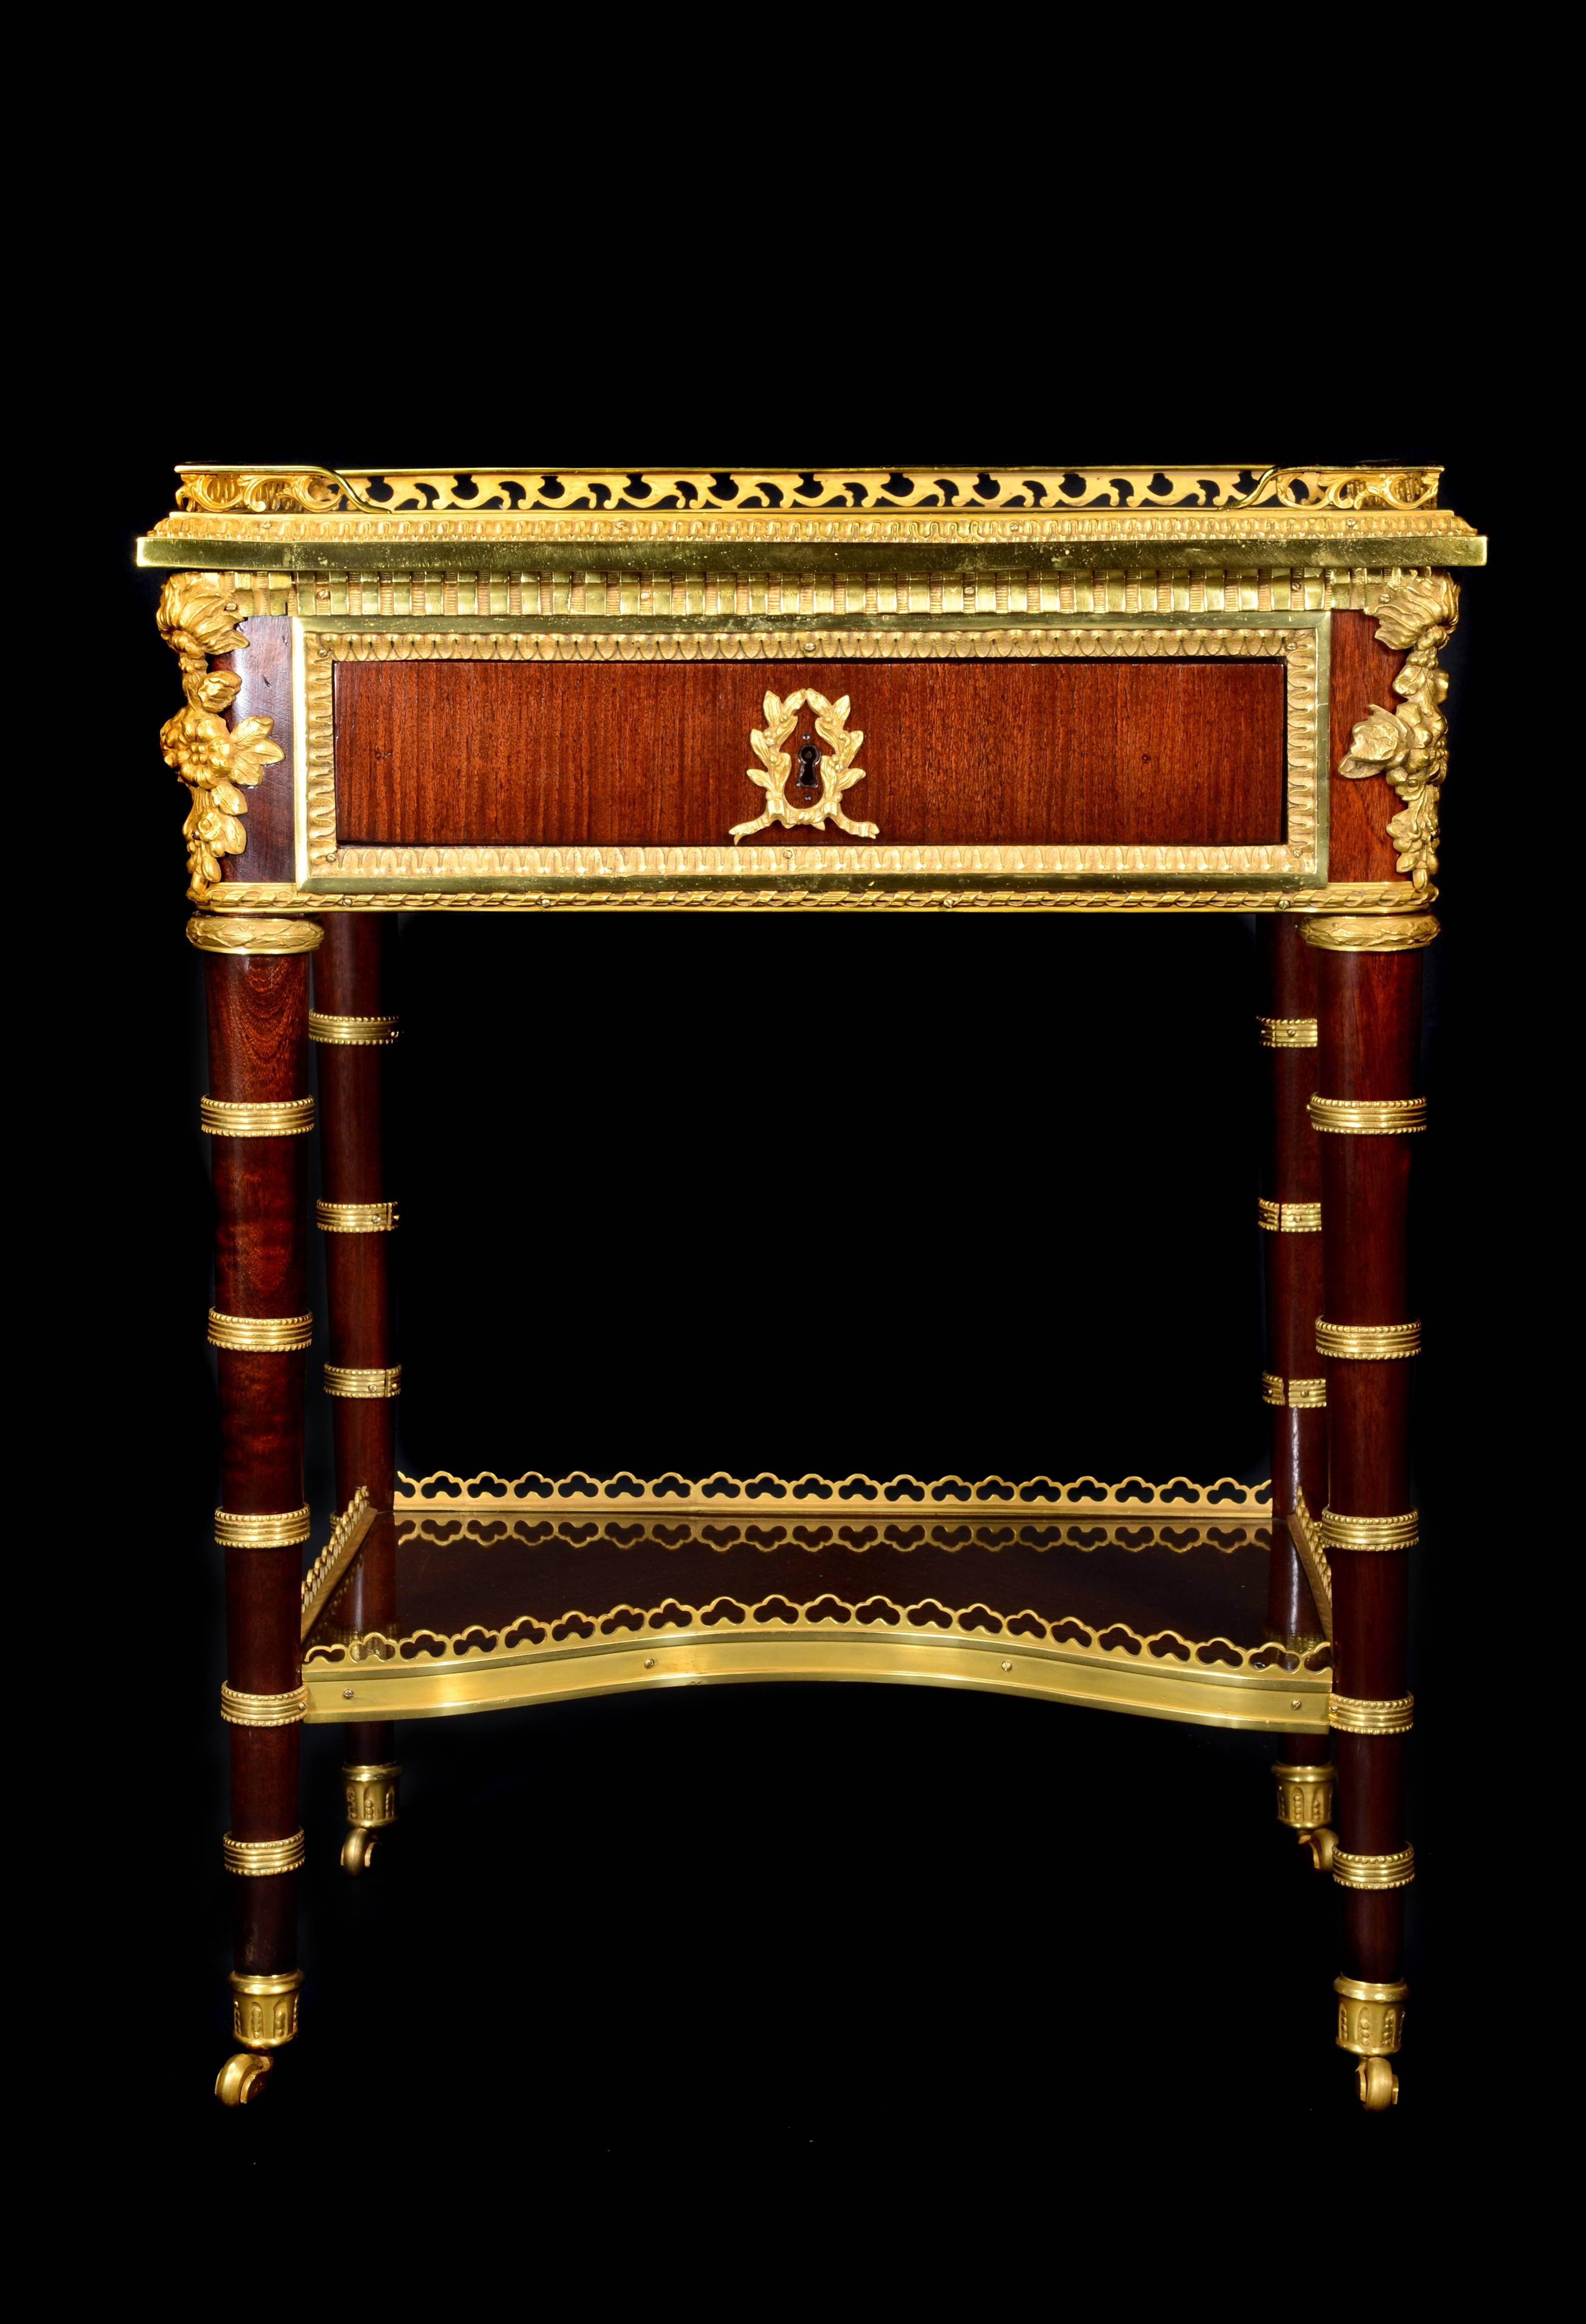 A pair of exquisite antique French Louis XVI style gilt bronze-mounted mahogany single drawer side tables of superb detail embellished with gilt bronze mounts and decorated all the way around.